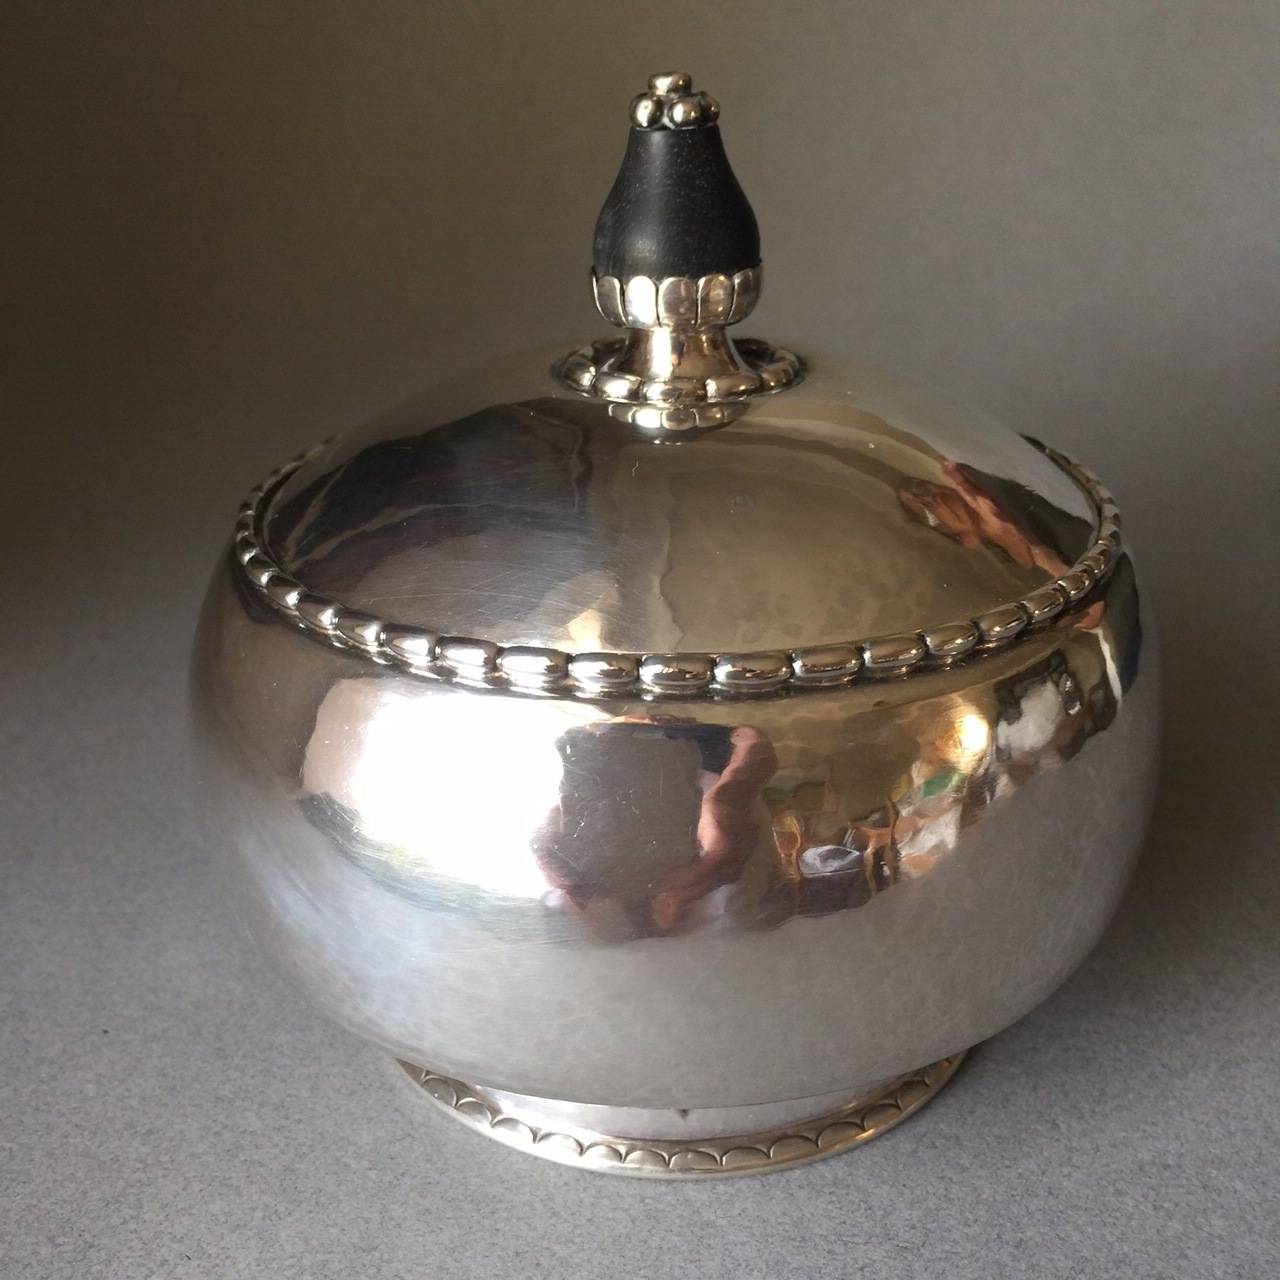 Georg Jensen 830 silver tea caddy no. 36.

Very rare to find a Georg Jensen tea caddy in an oval shape. Snug lid with an intricate ebony finial on top with inlaid grape design. Hand-hammered throughout. 

830 silver and early Georg Jensen marks